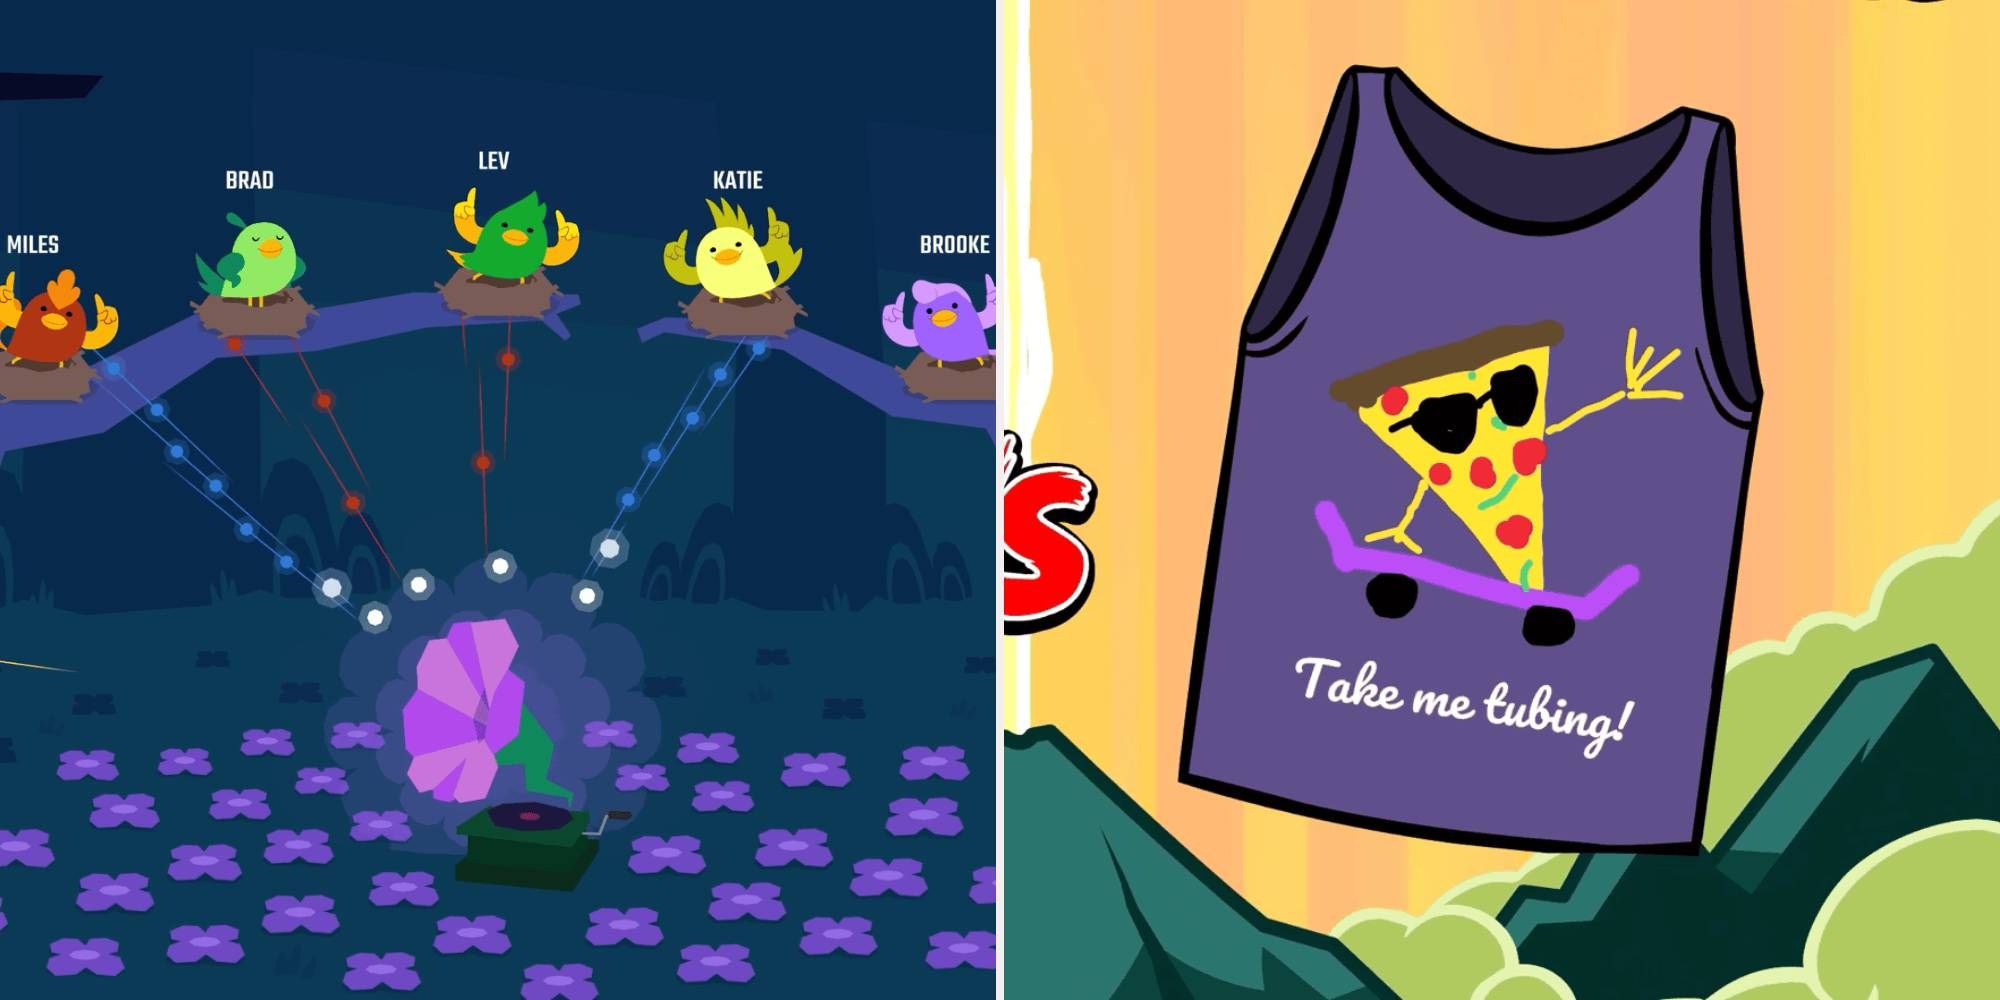 Left, birds singing in a rhythm minigame. Right, a t-shirt design of a pizza skateboarding.